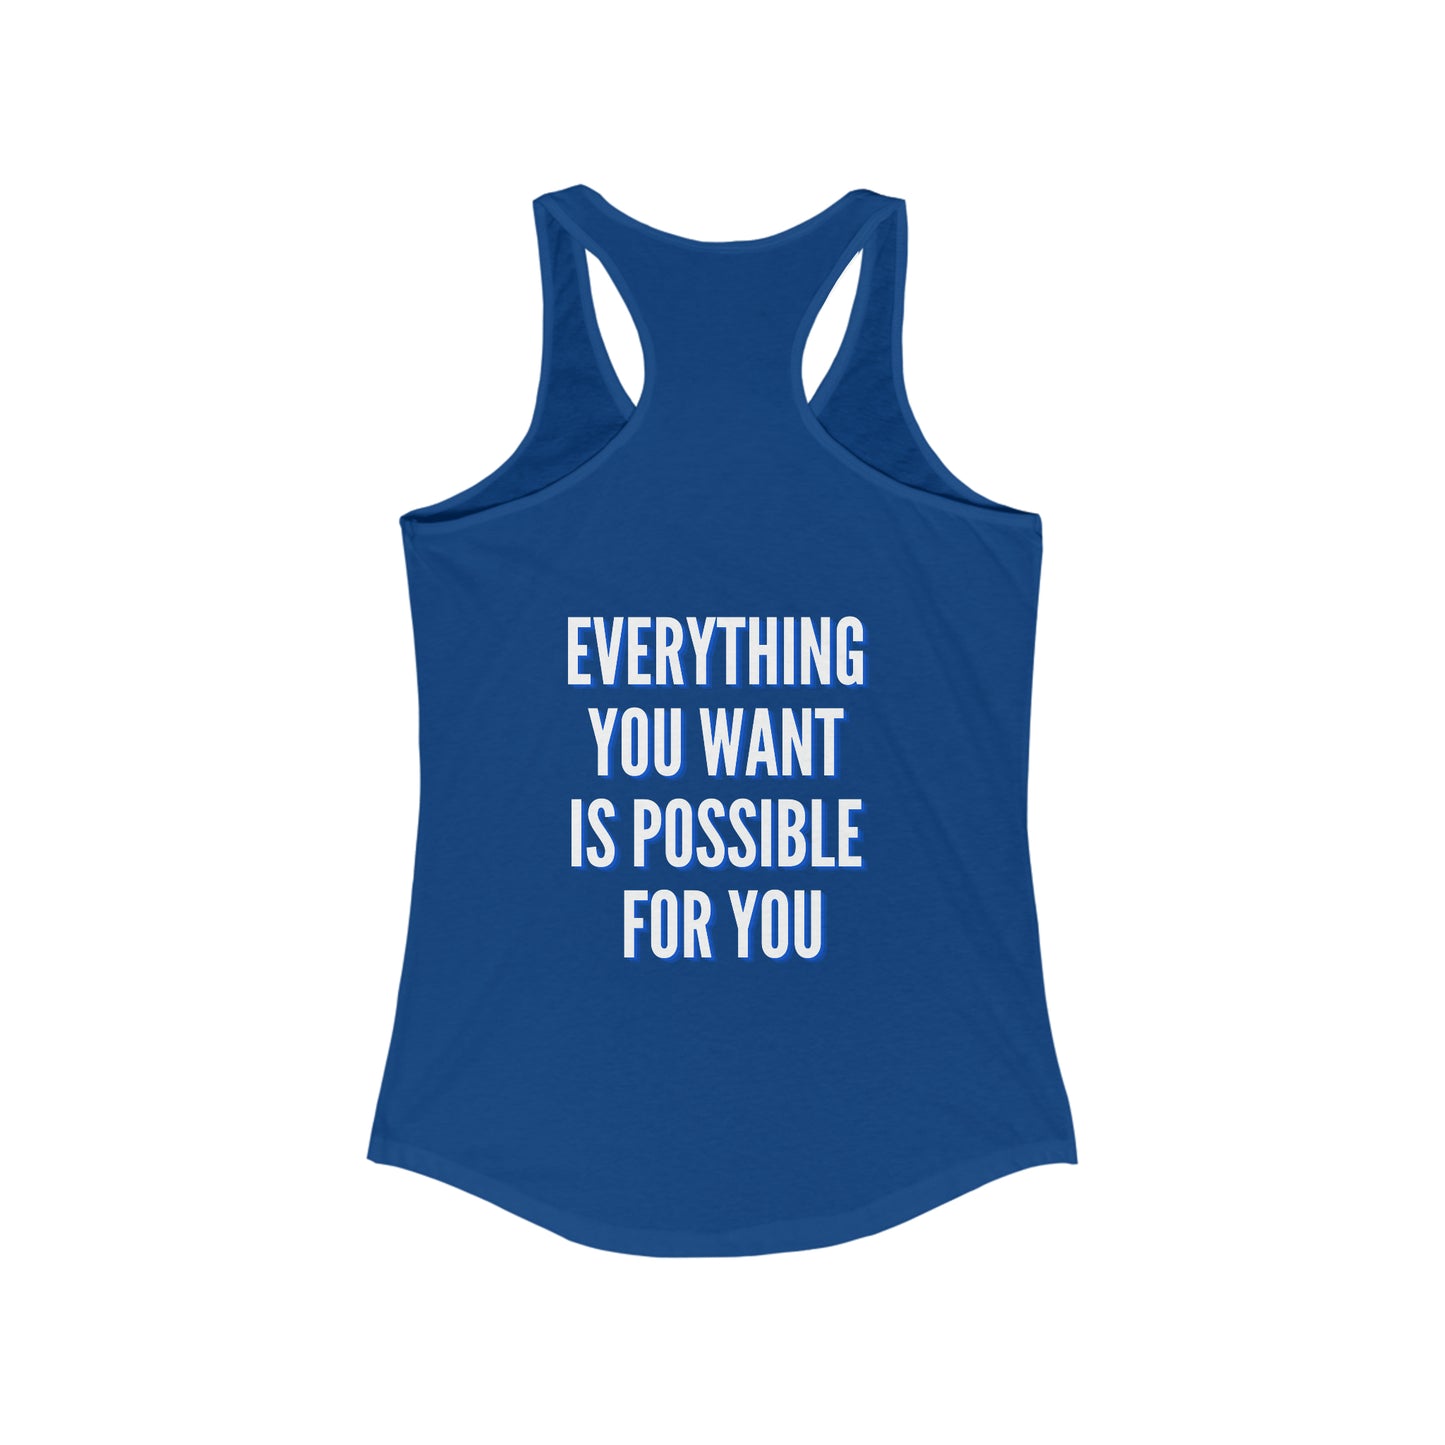 Women's RGA Tank - Everything You Want Is Possible For You